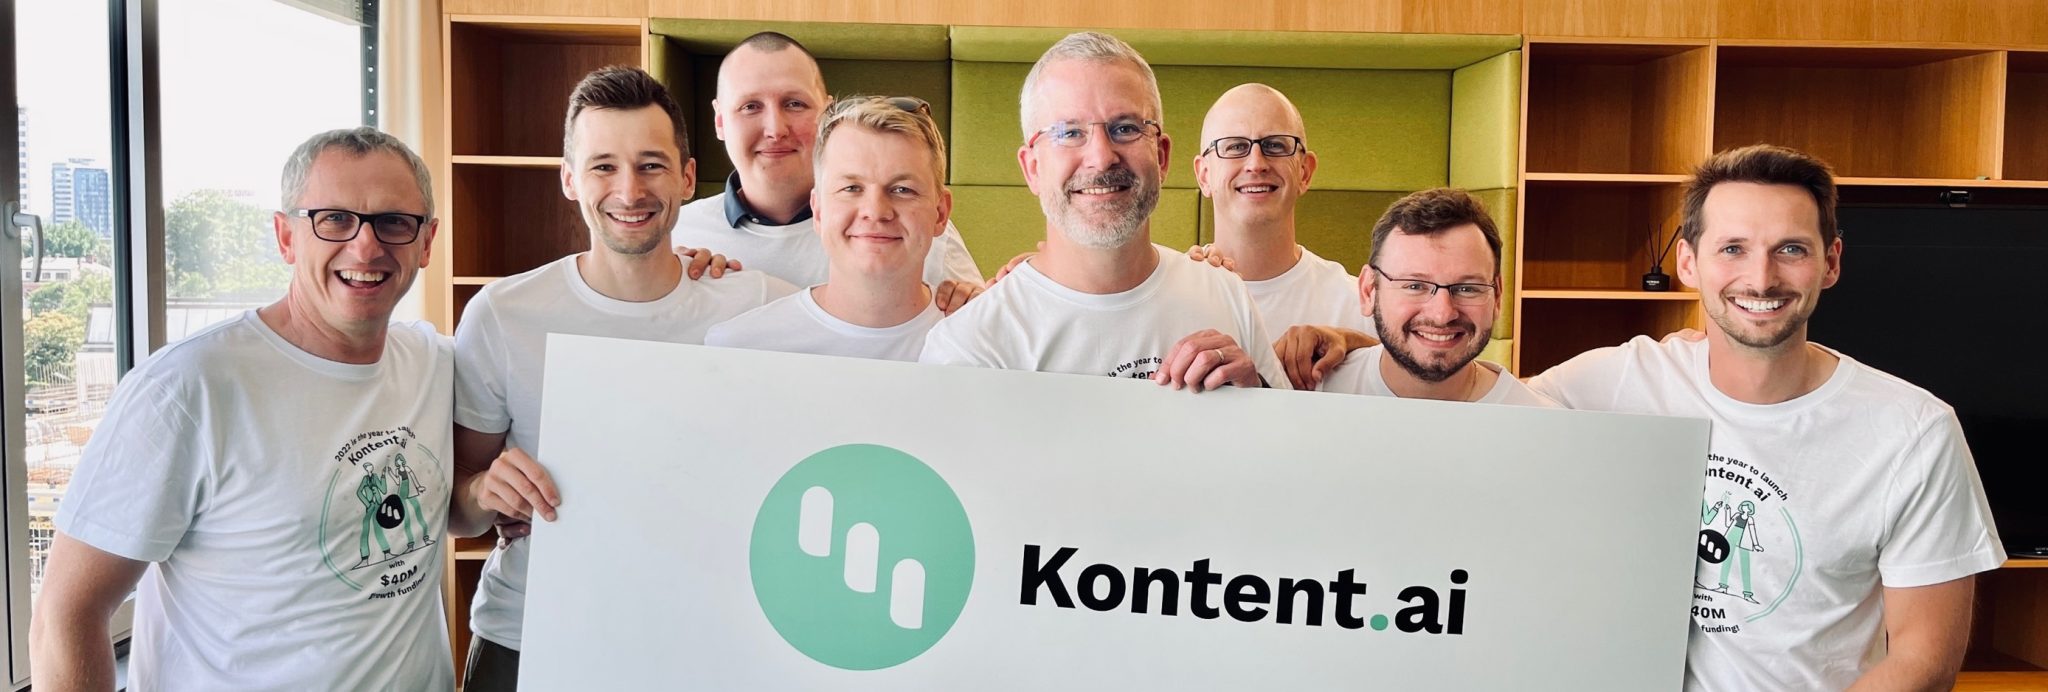 Expedition invests in digital experience platform, Kentico, and headless CMS platform, Kontent.ai